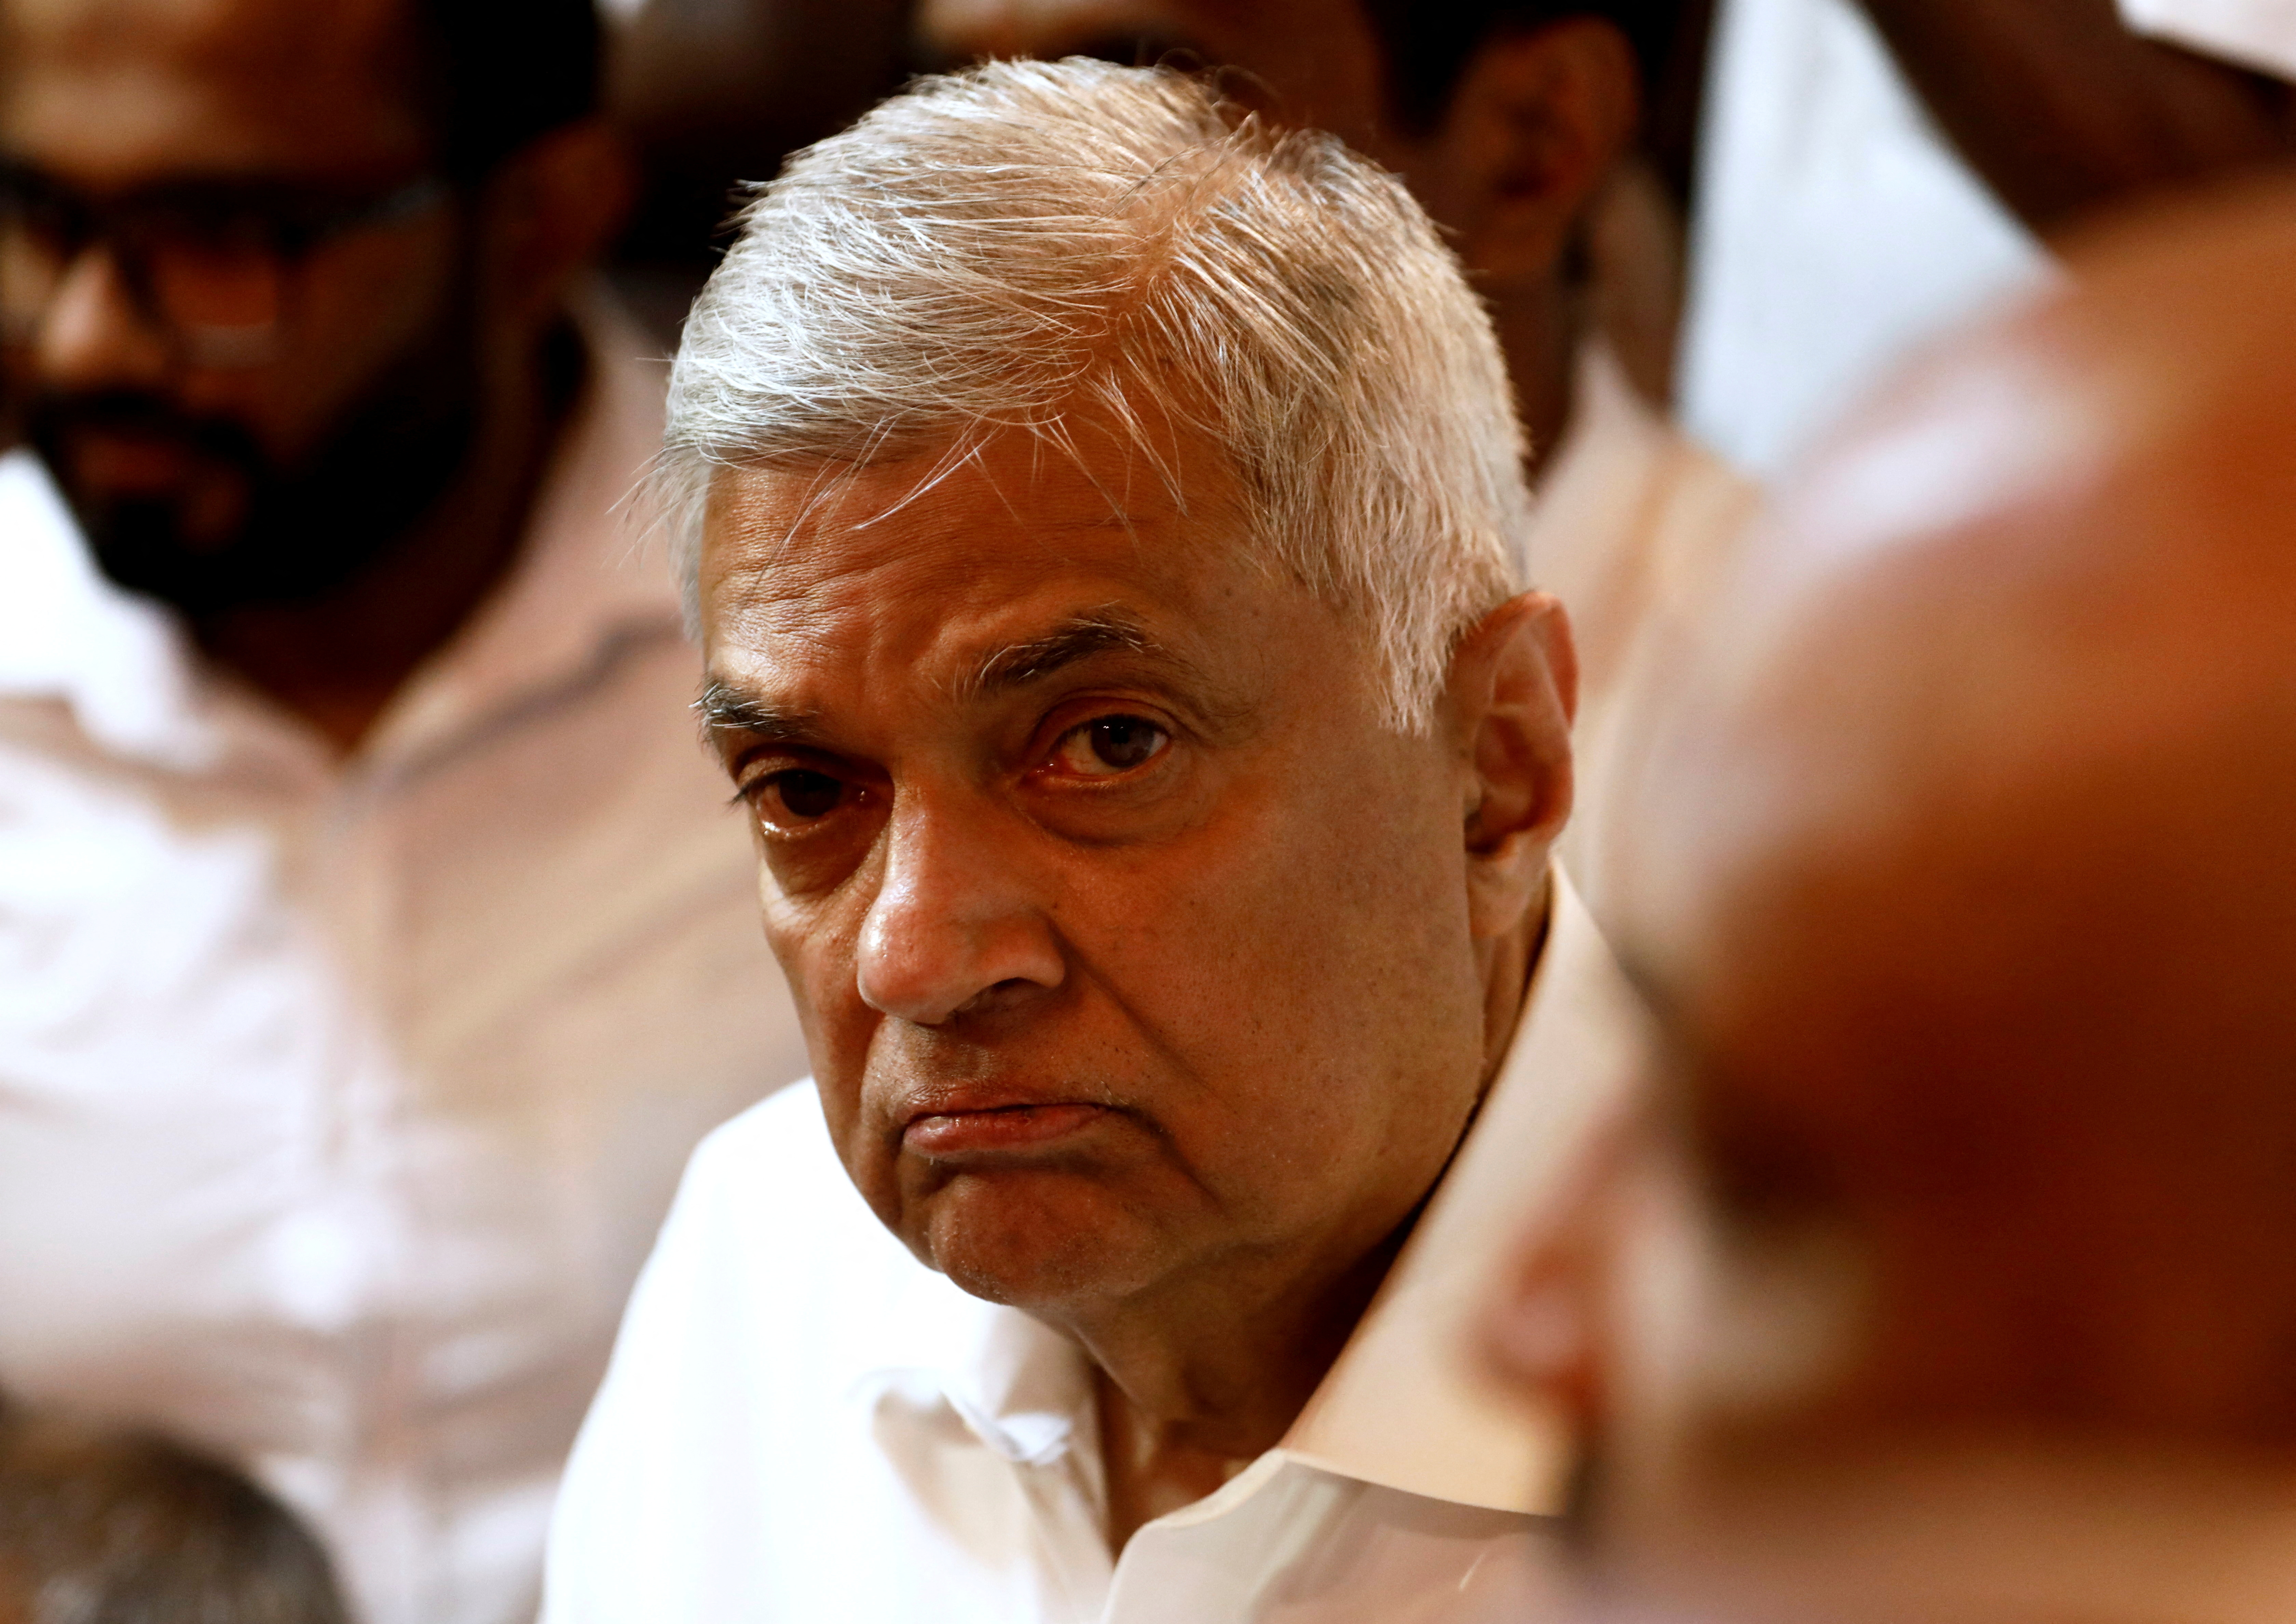   Wickremesinghe was named interim president, the reason for the departure of Rajapaksa